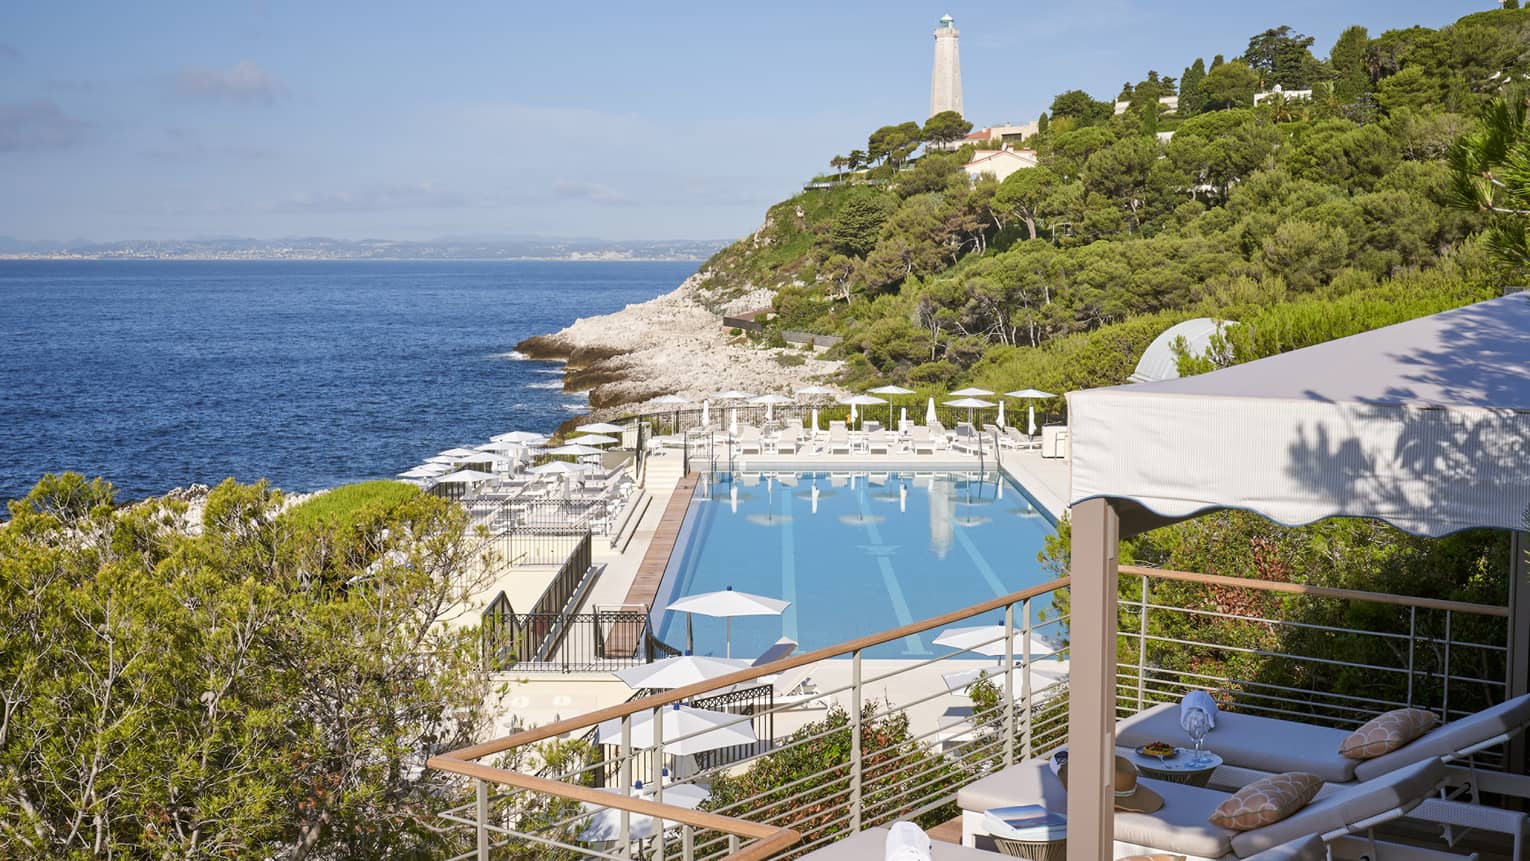 View from terrace of Club Dauphin pool, Mediterranean, green hillside and lighthouse